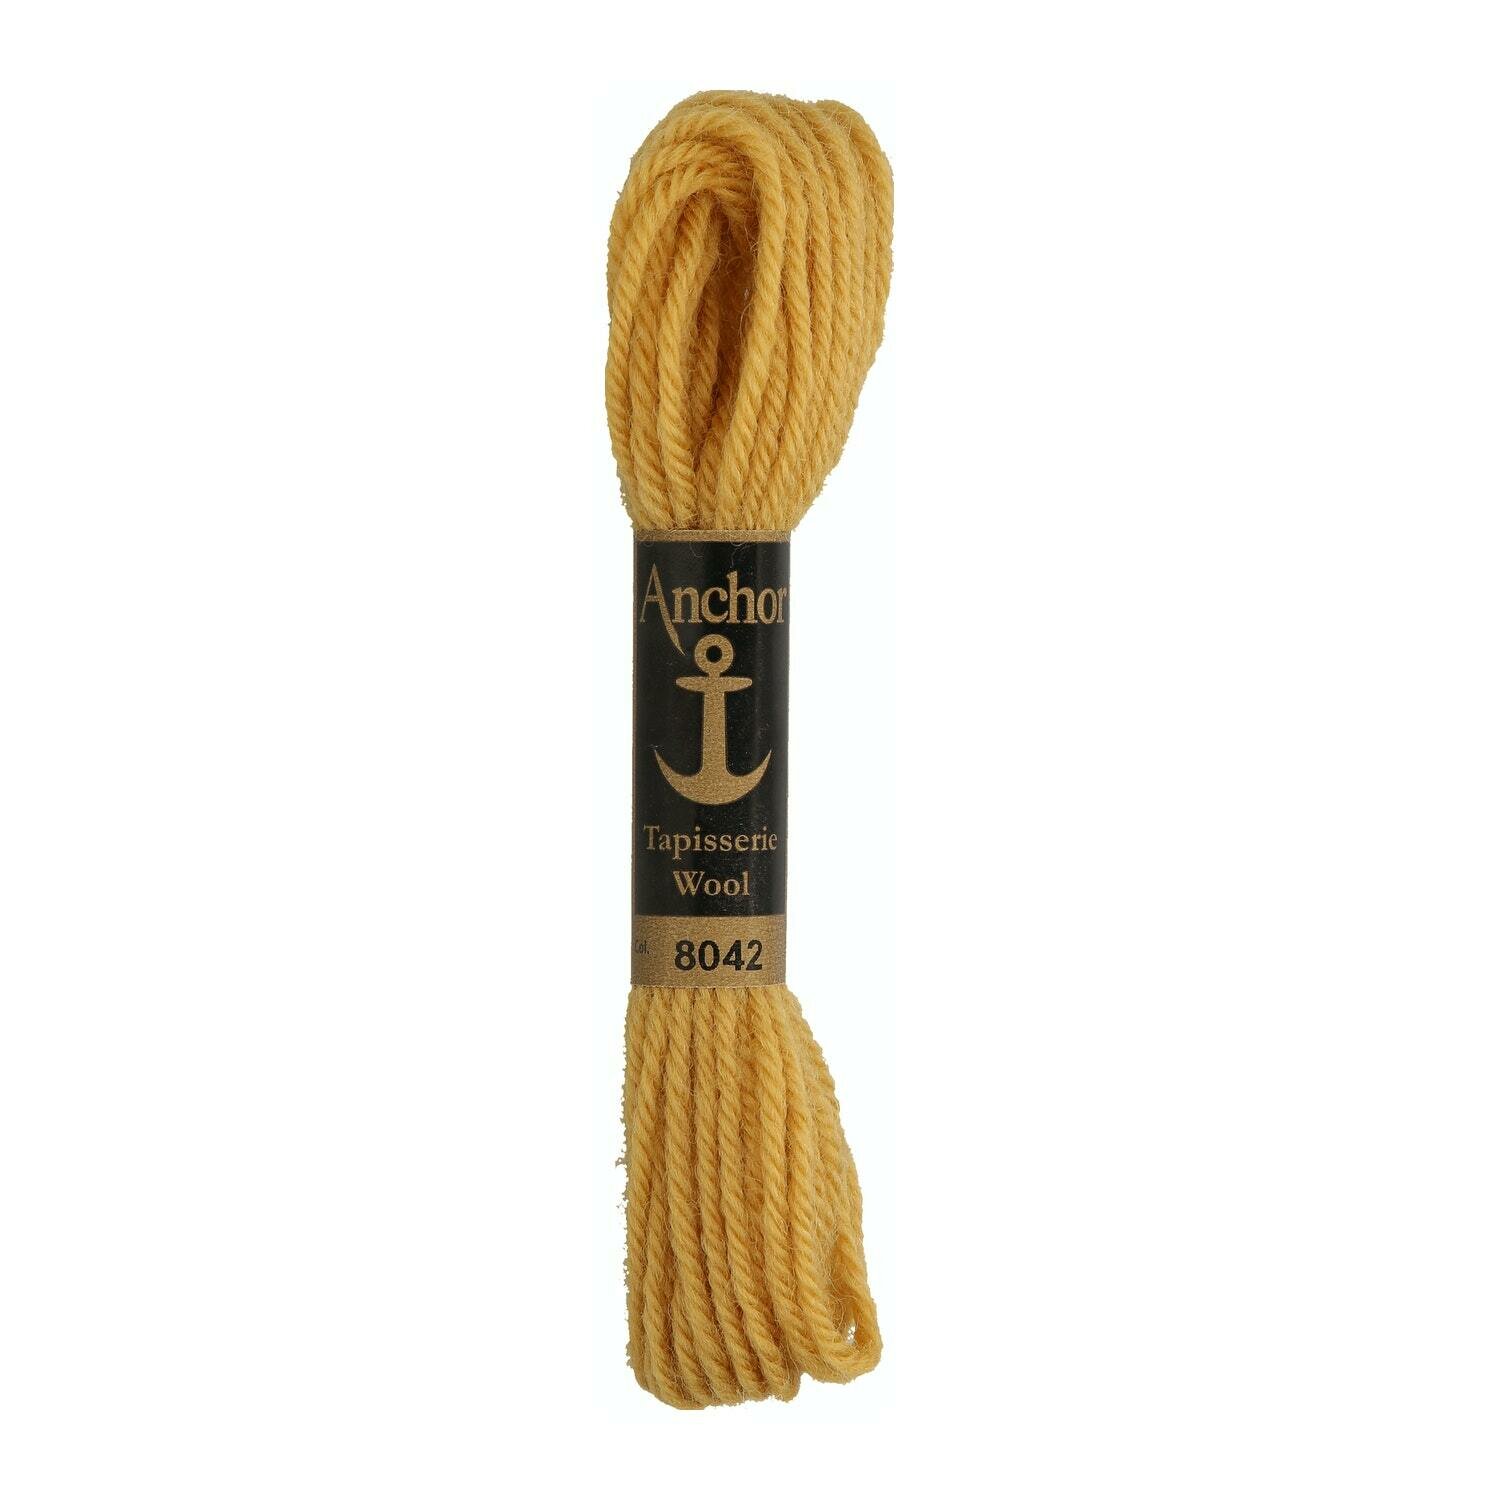 Anchor Tapisserie Wool #  08042